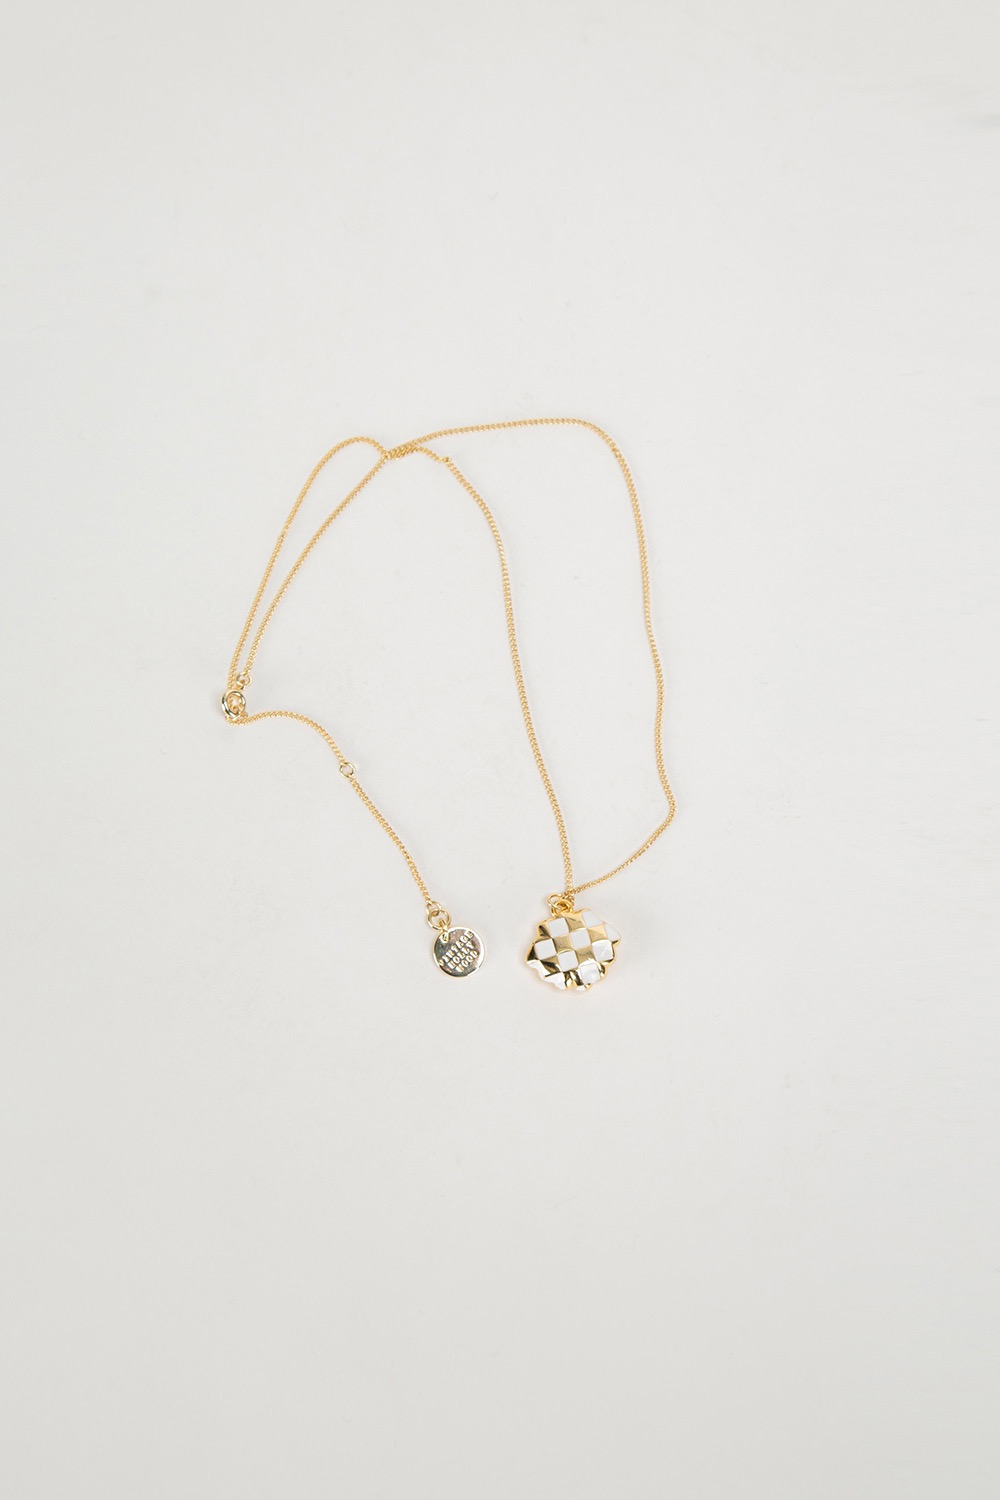 SEASHELL NECKLACE - PLATED 18K GOLD